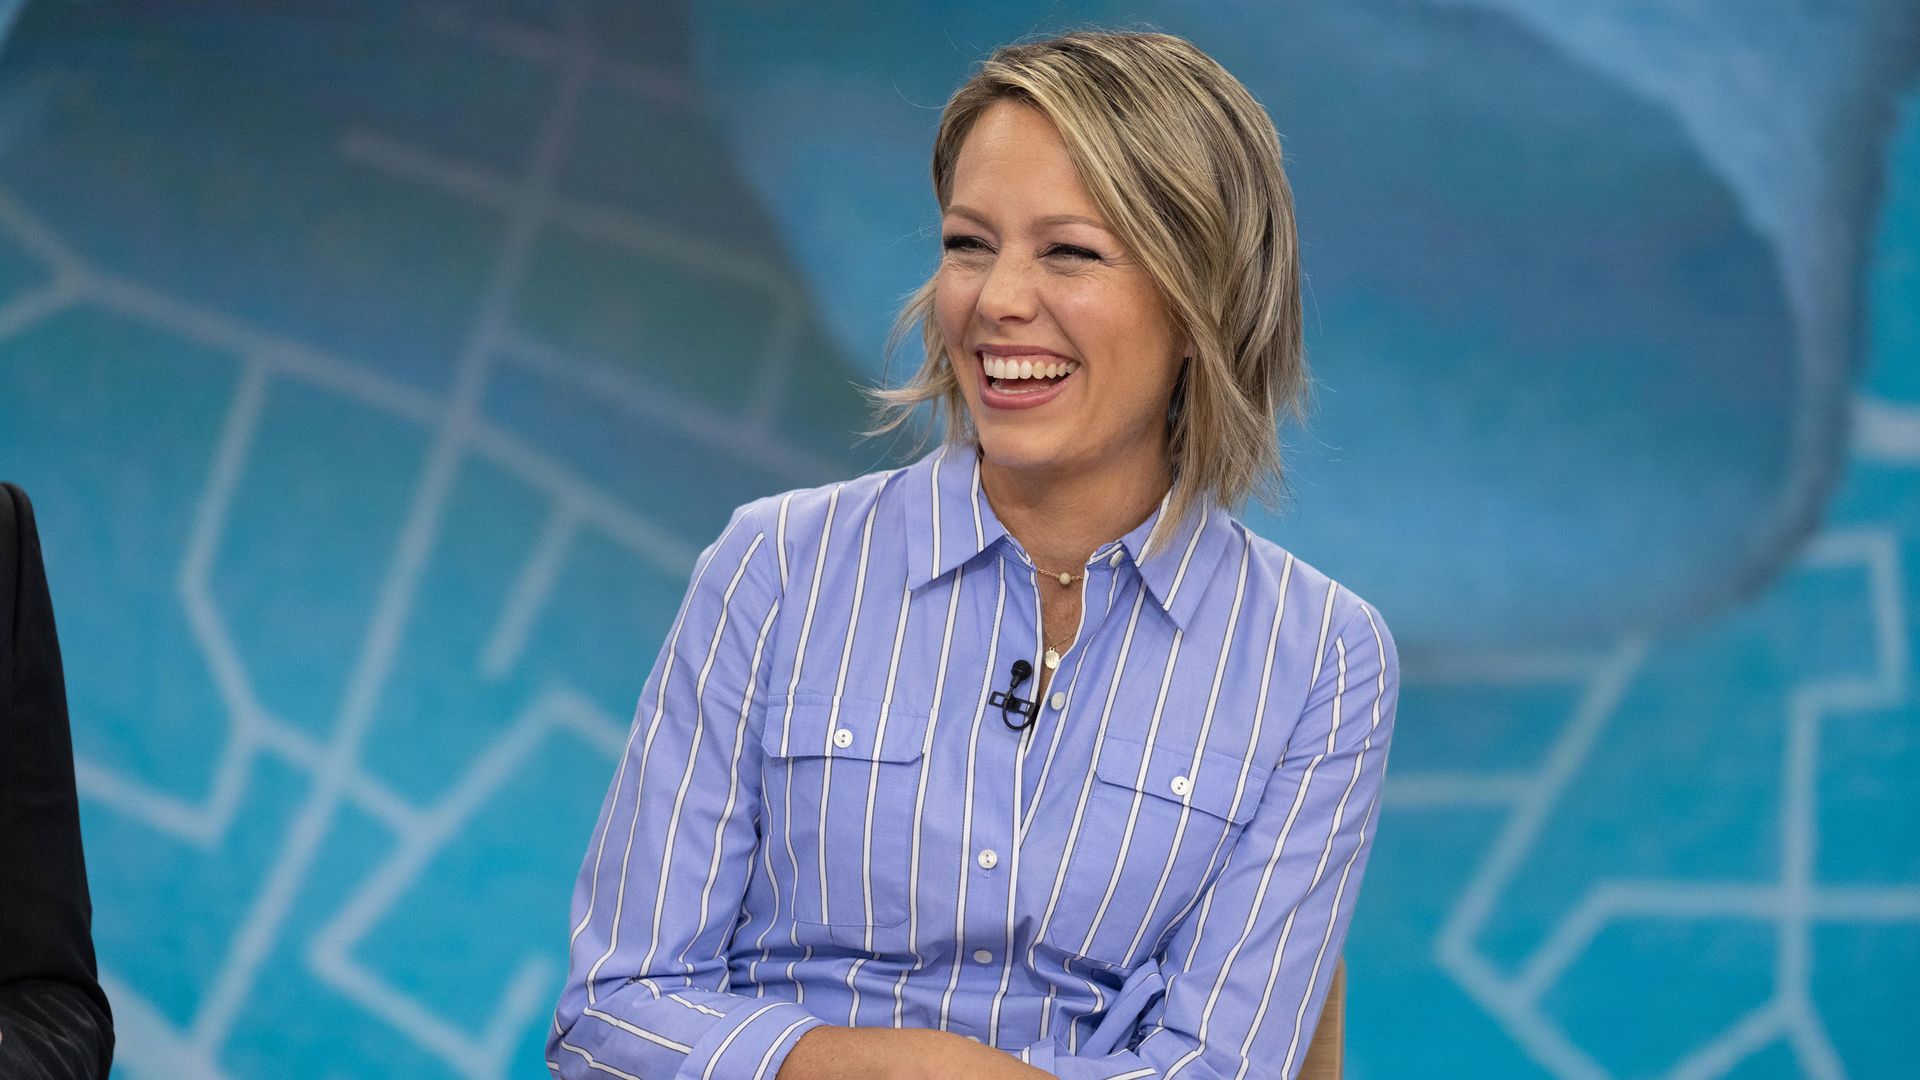 Dylan Dreyer laughing in a blue shirt